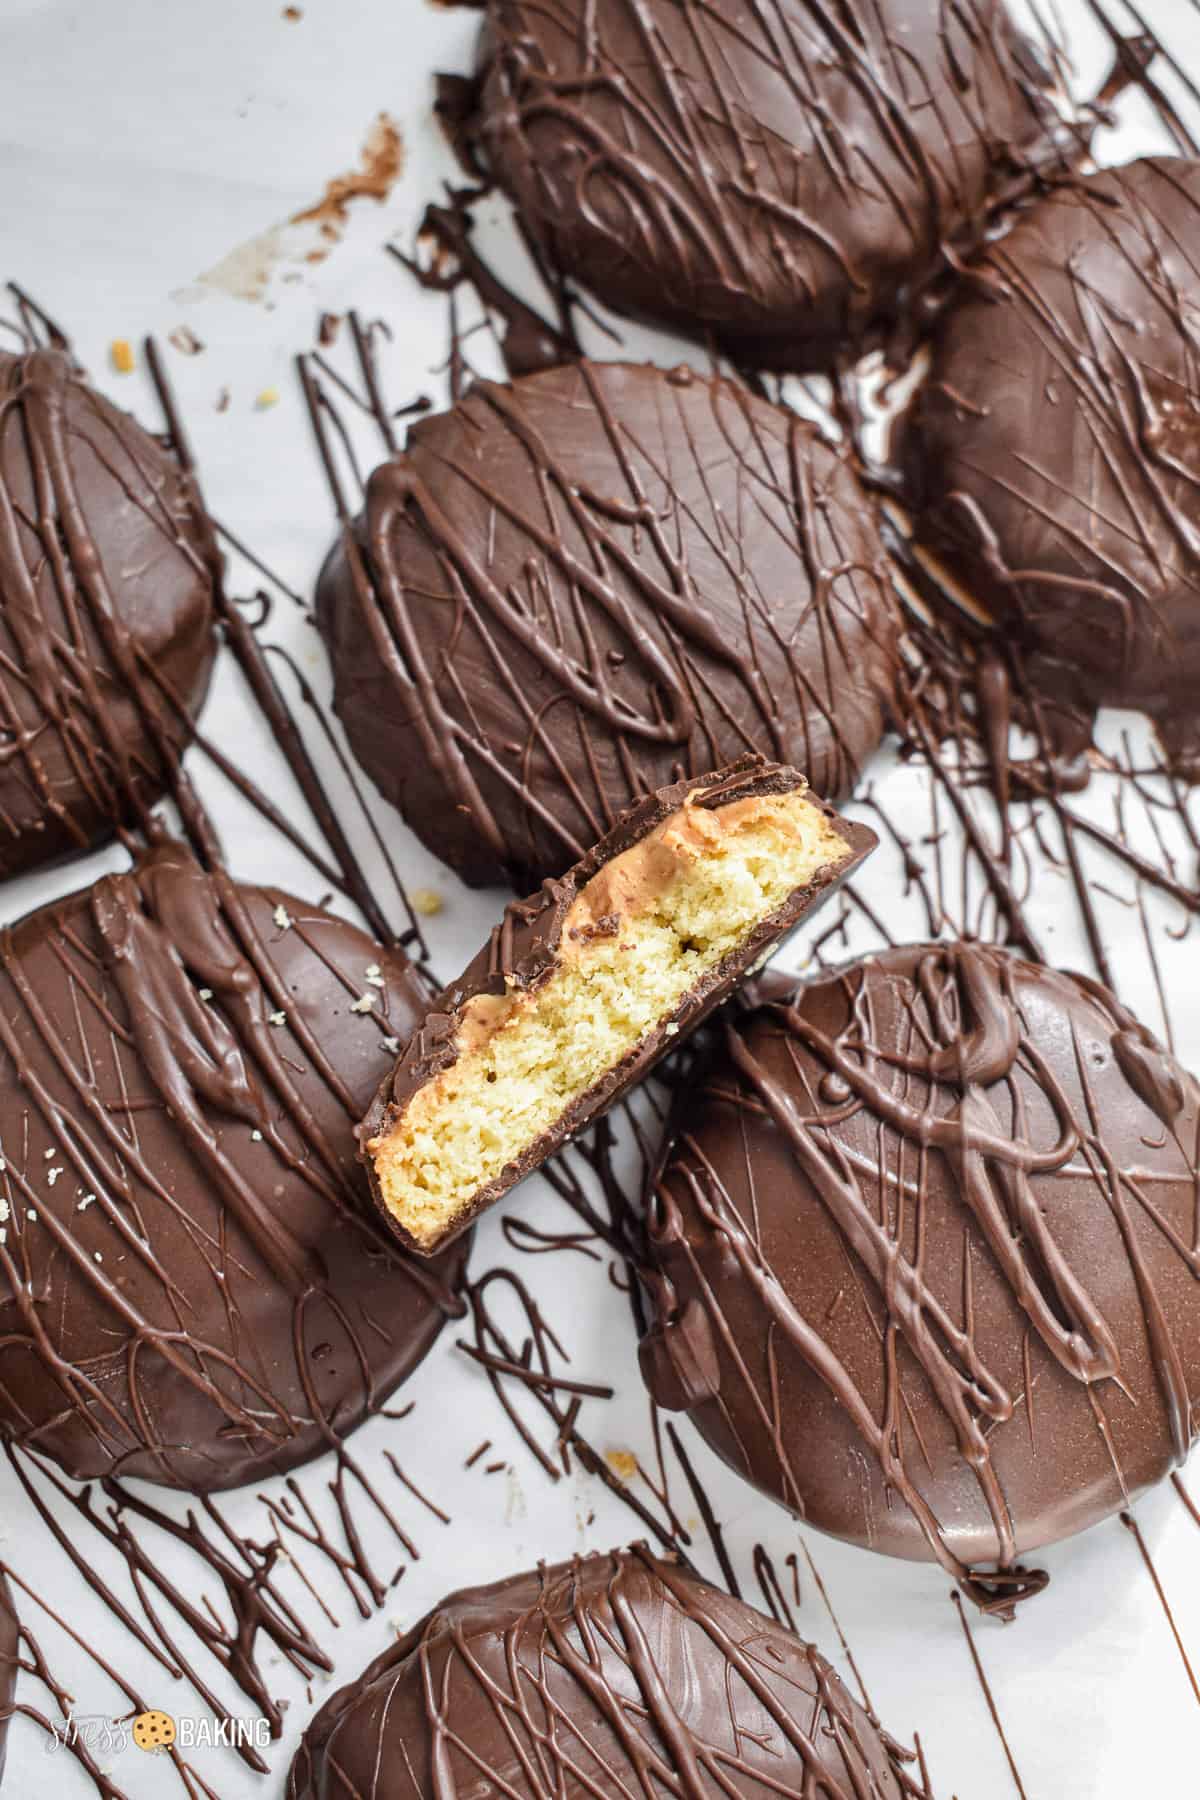 Shortbread cookie filled with peanut butter on top of other chocolate covered cookies